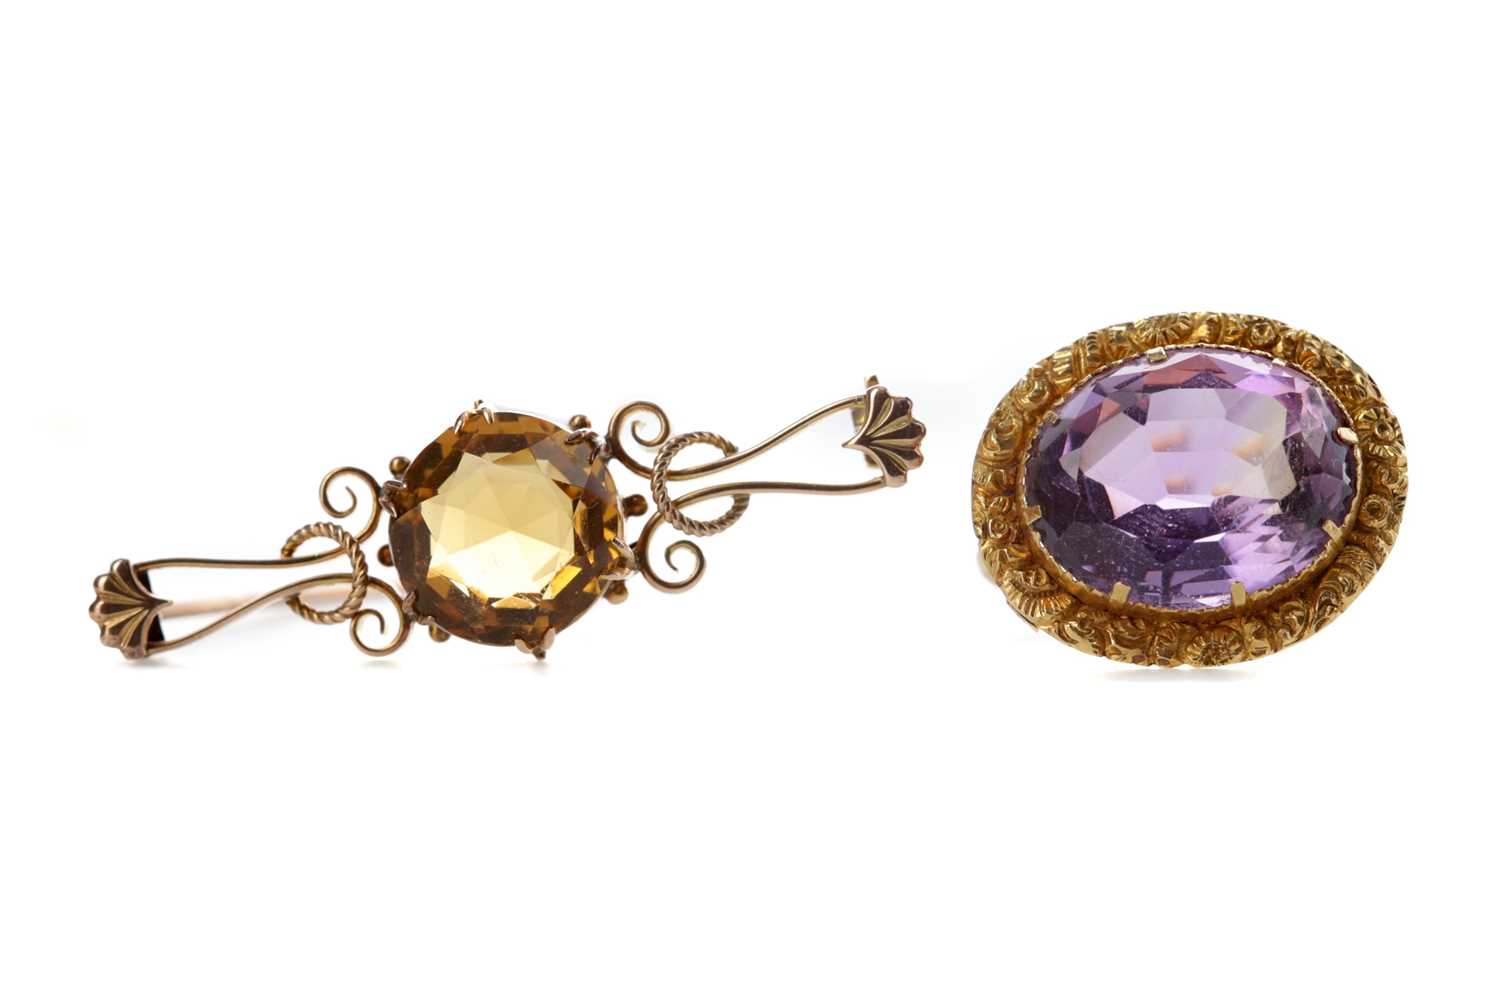 Lot 908 - AN AMETHYST AND A CITRINE BROOCH